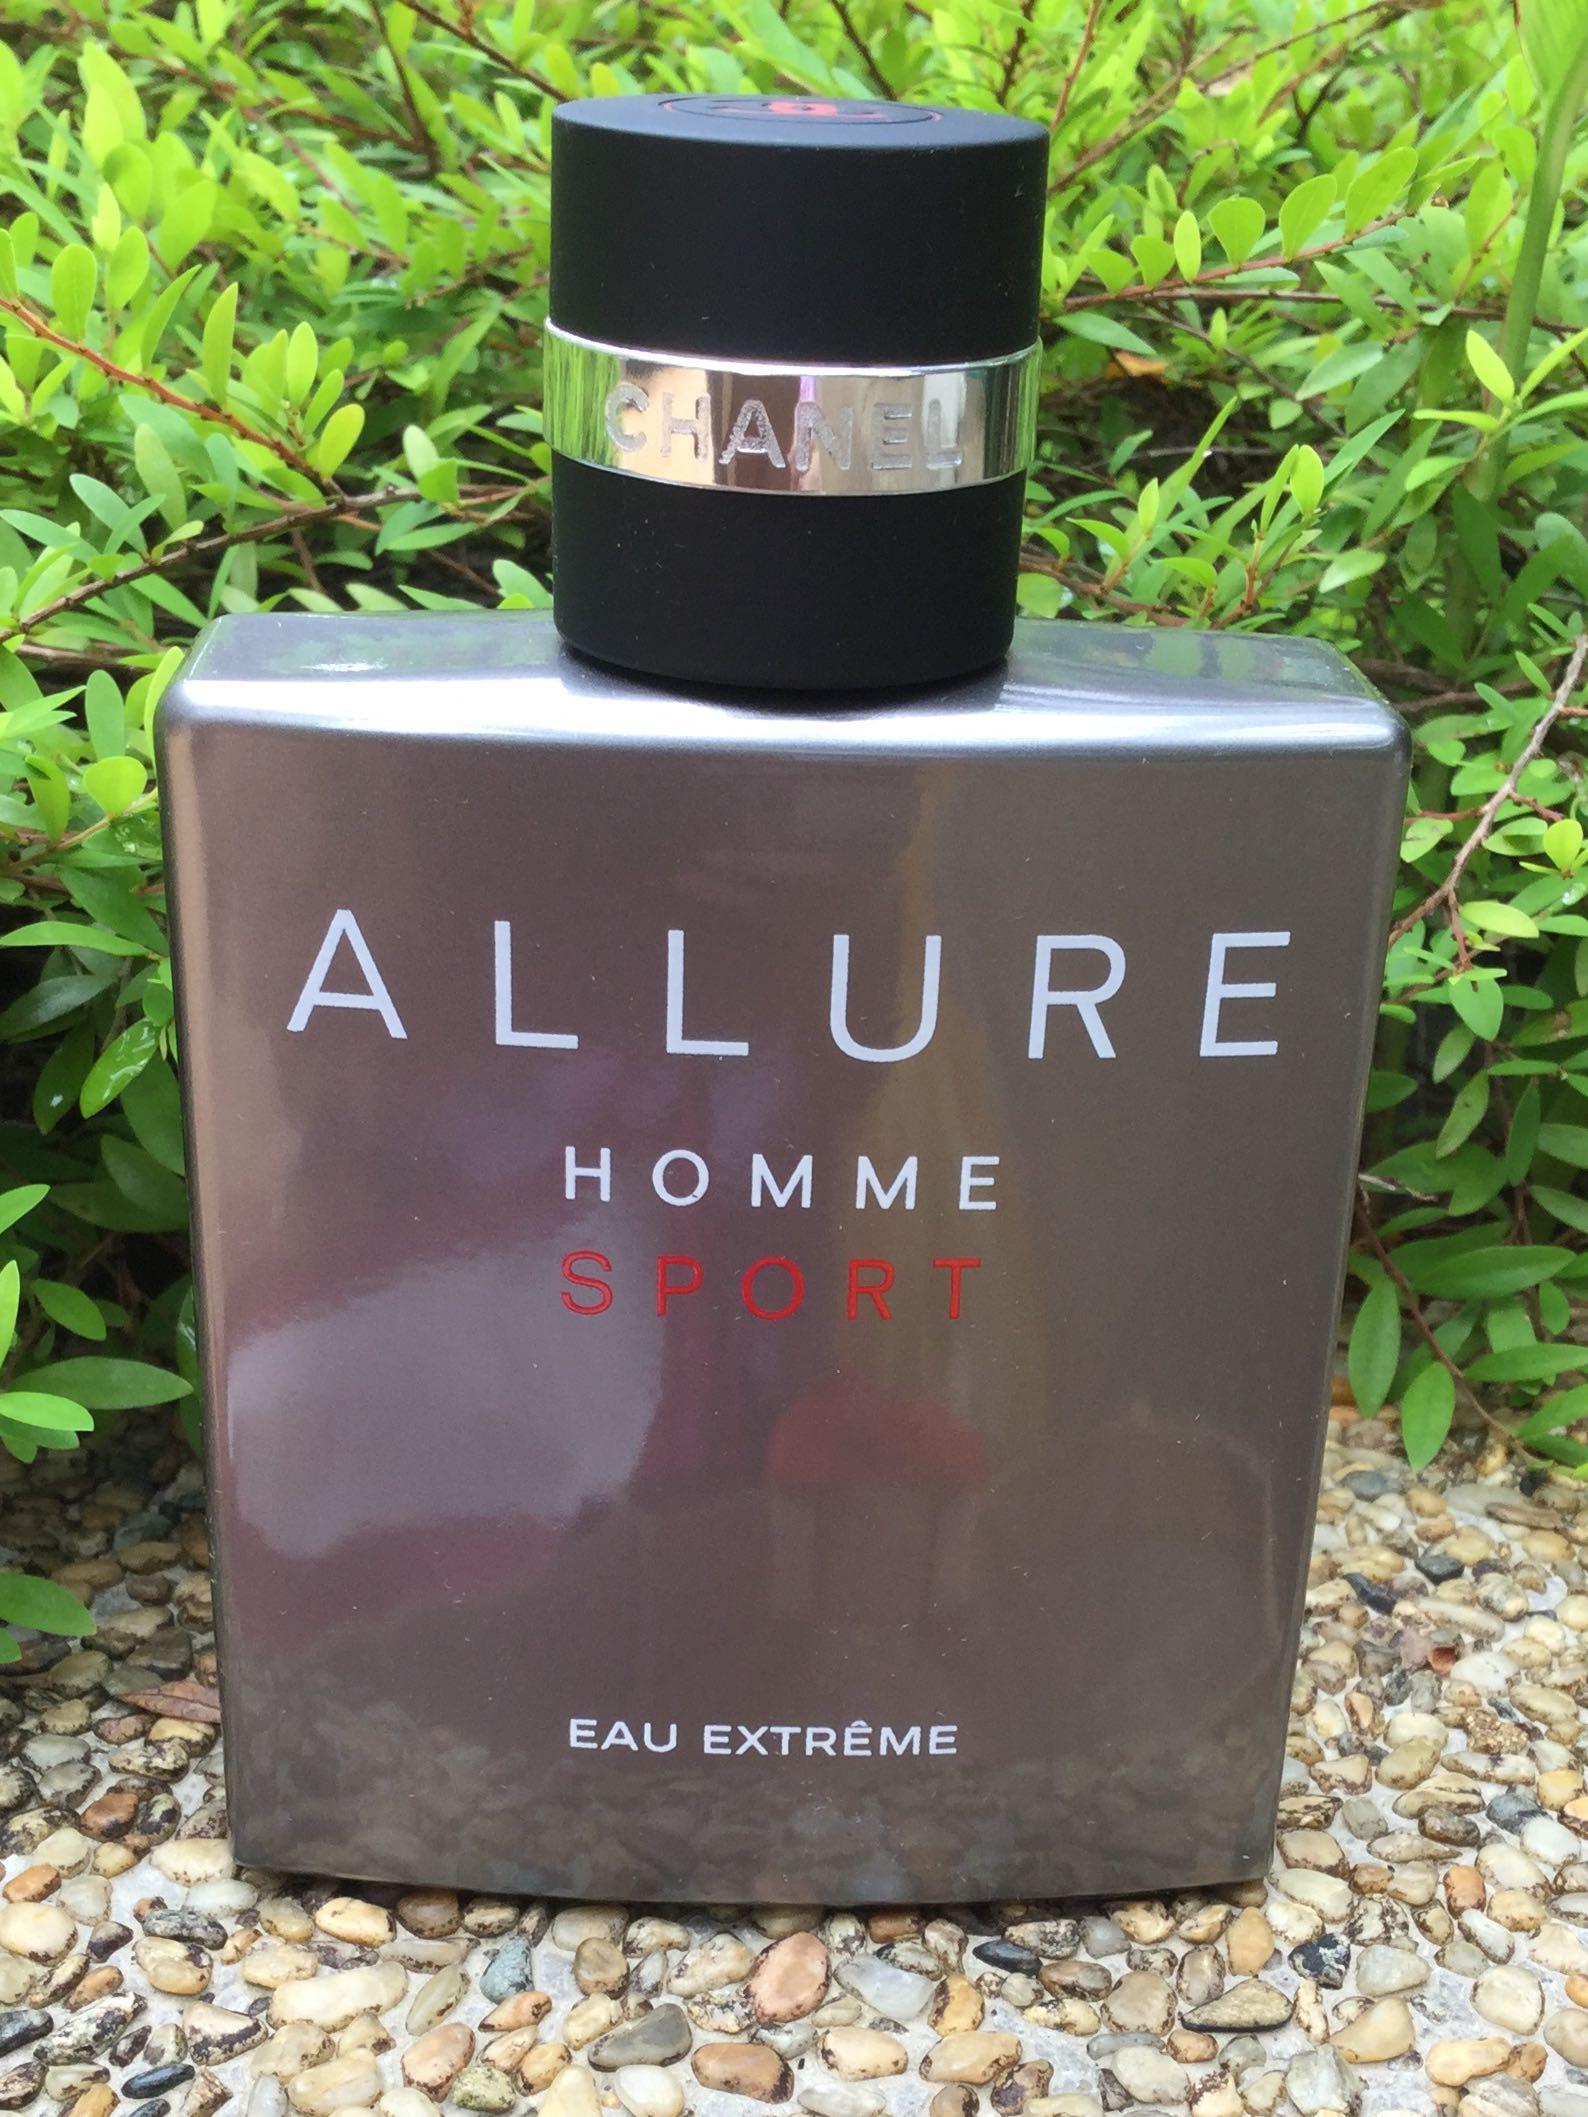 Chanel Allure Homme Sport Eau Extreme (reserv)